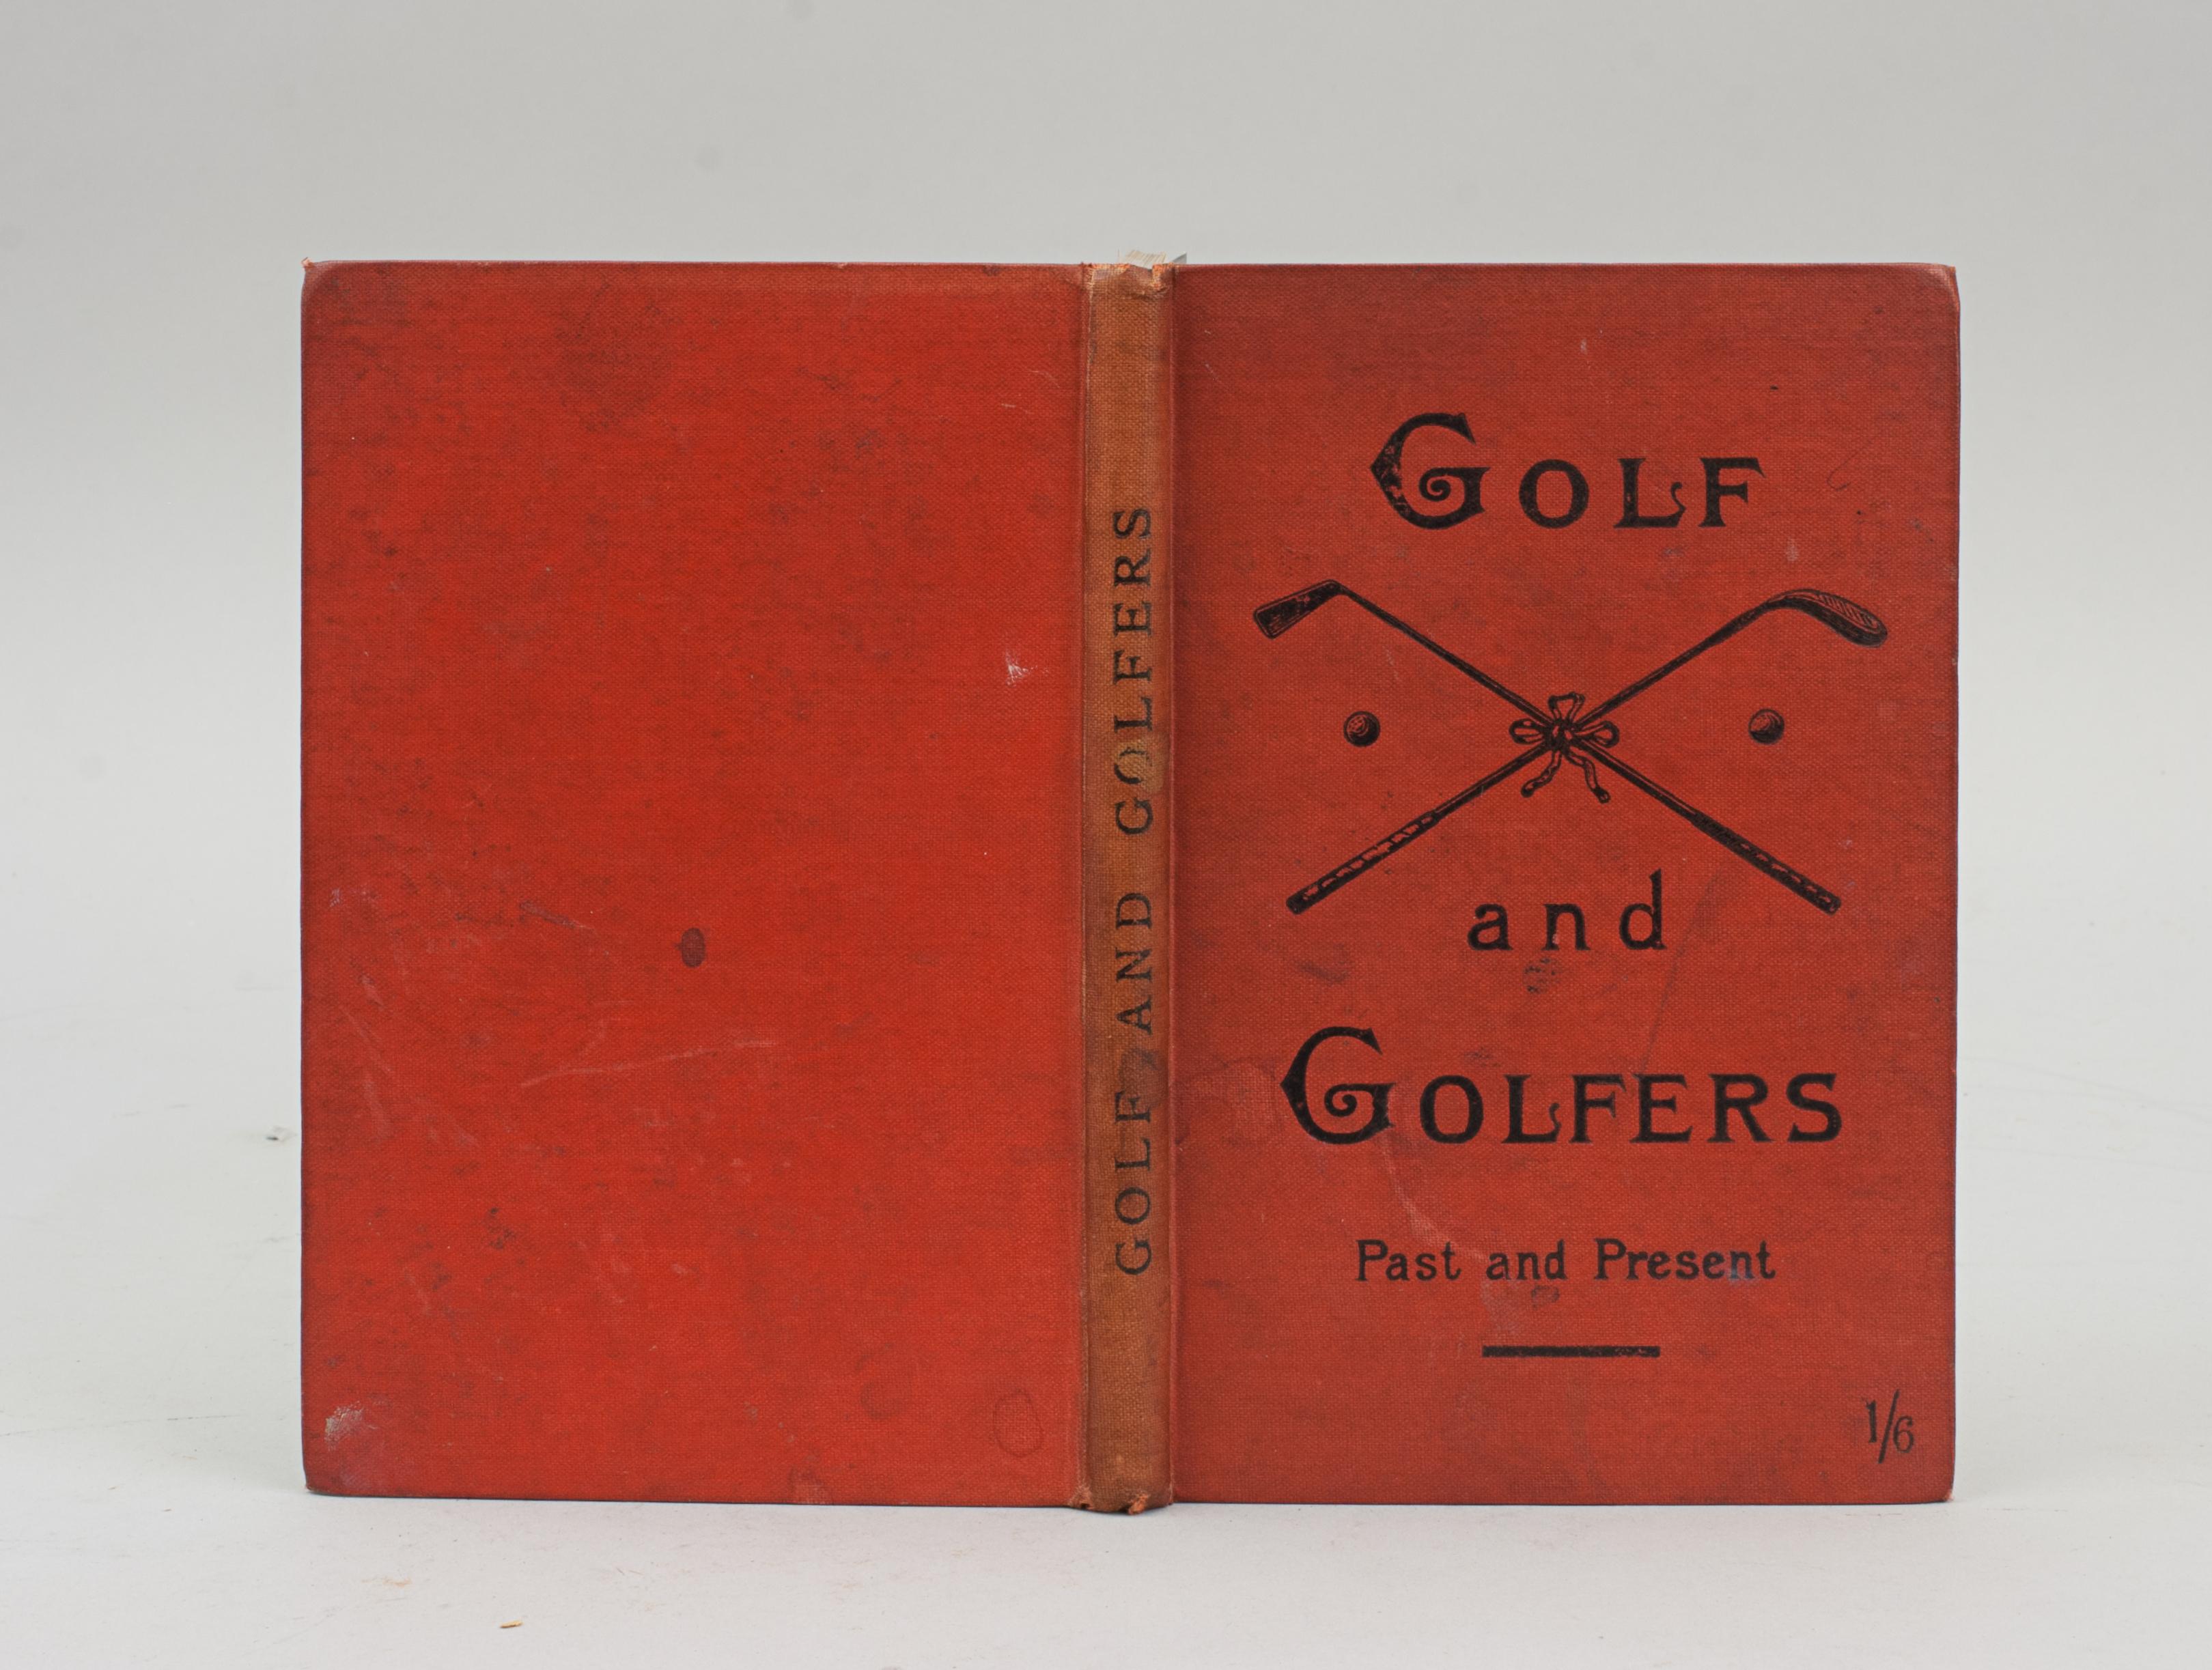 Sporting Art Vintage Golf Book, Golf and Golfers, Past and Present. For Sale